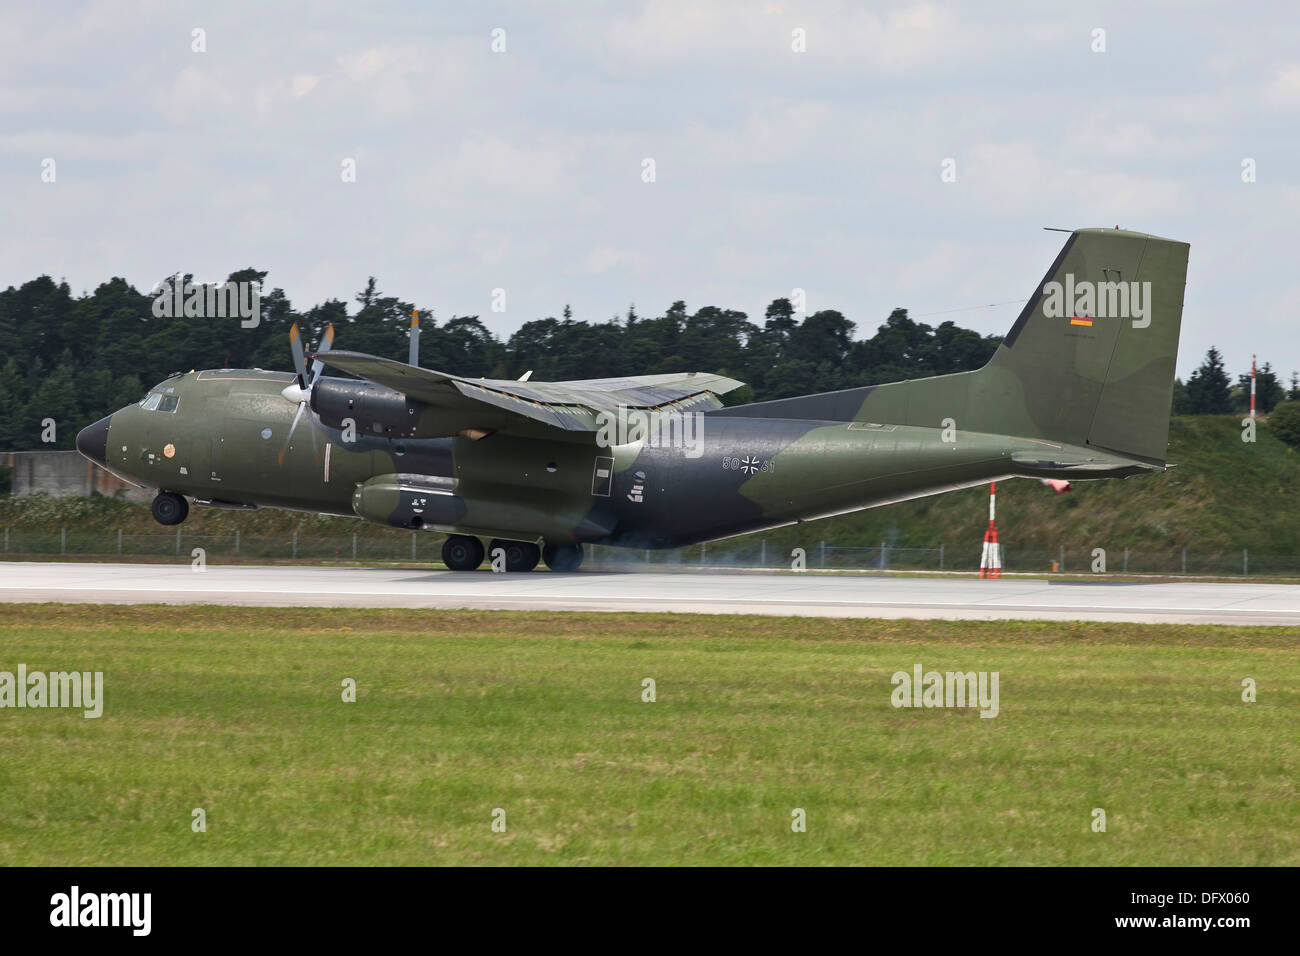 Transall C-160G of the German Air Force touching down on the runway, Manching, Germany. Stock Photo